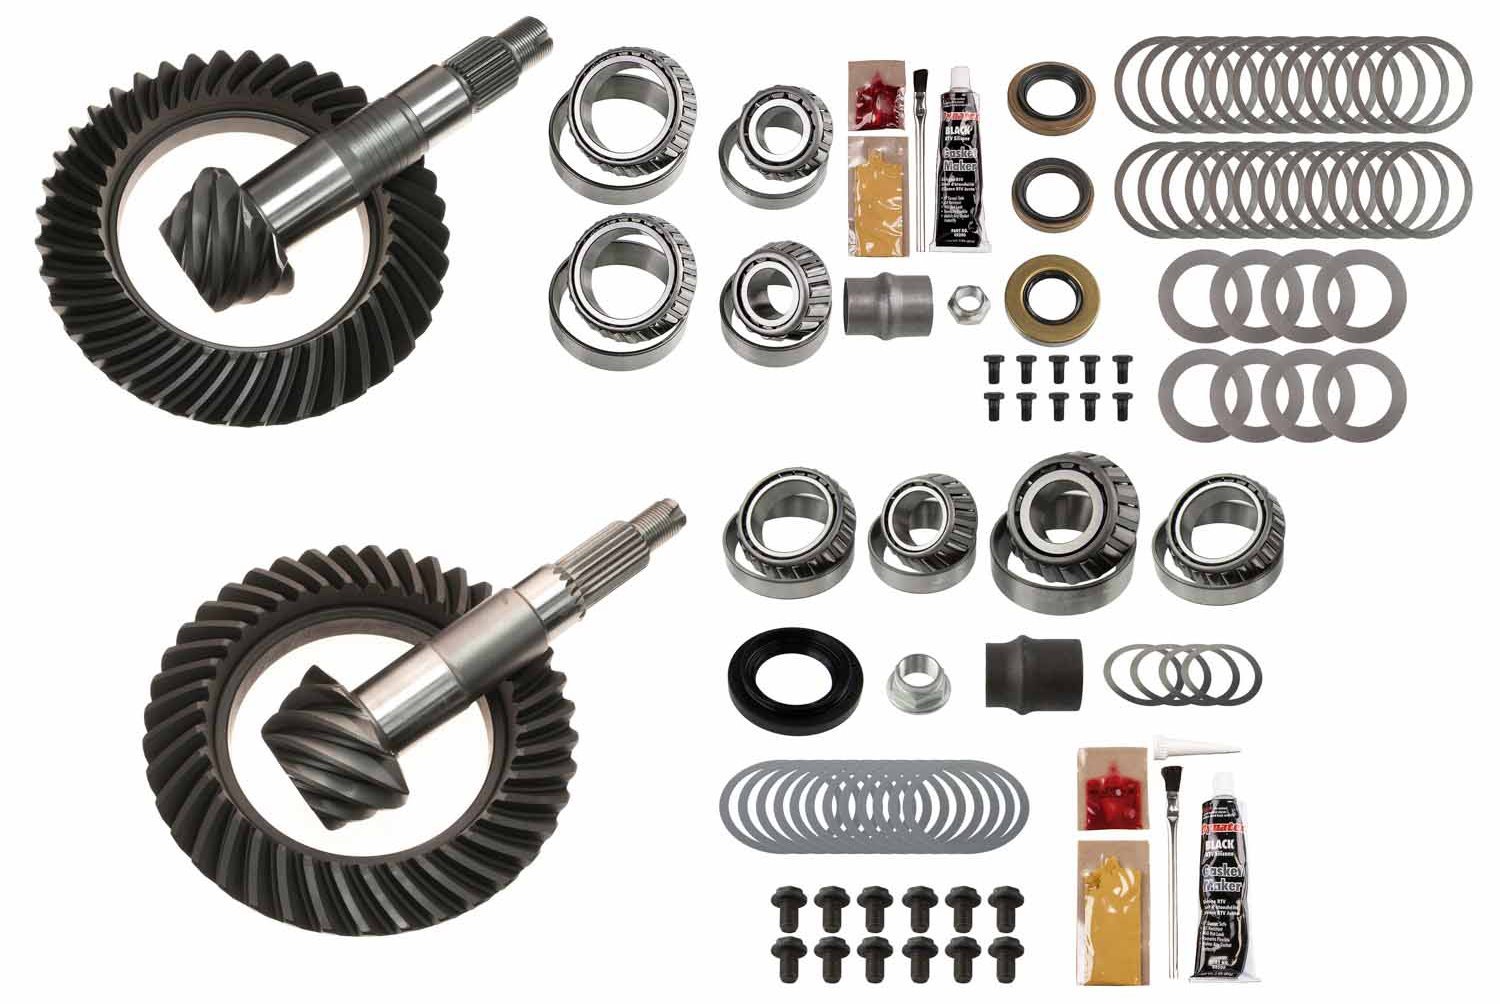 Complete Front and Rear Ring and Pinion Kit 1995-04 Toyota Tacoma, 2000-2006 Toyota Tundra, 2001-07 Toyota Sequoia - 4.88 Ratio